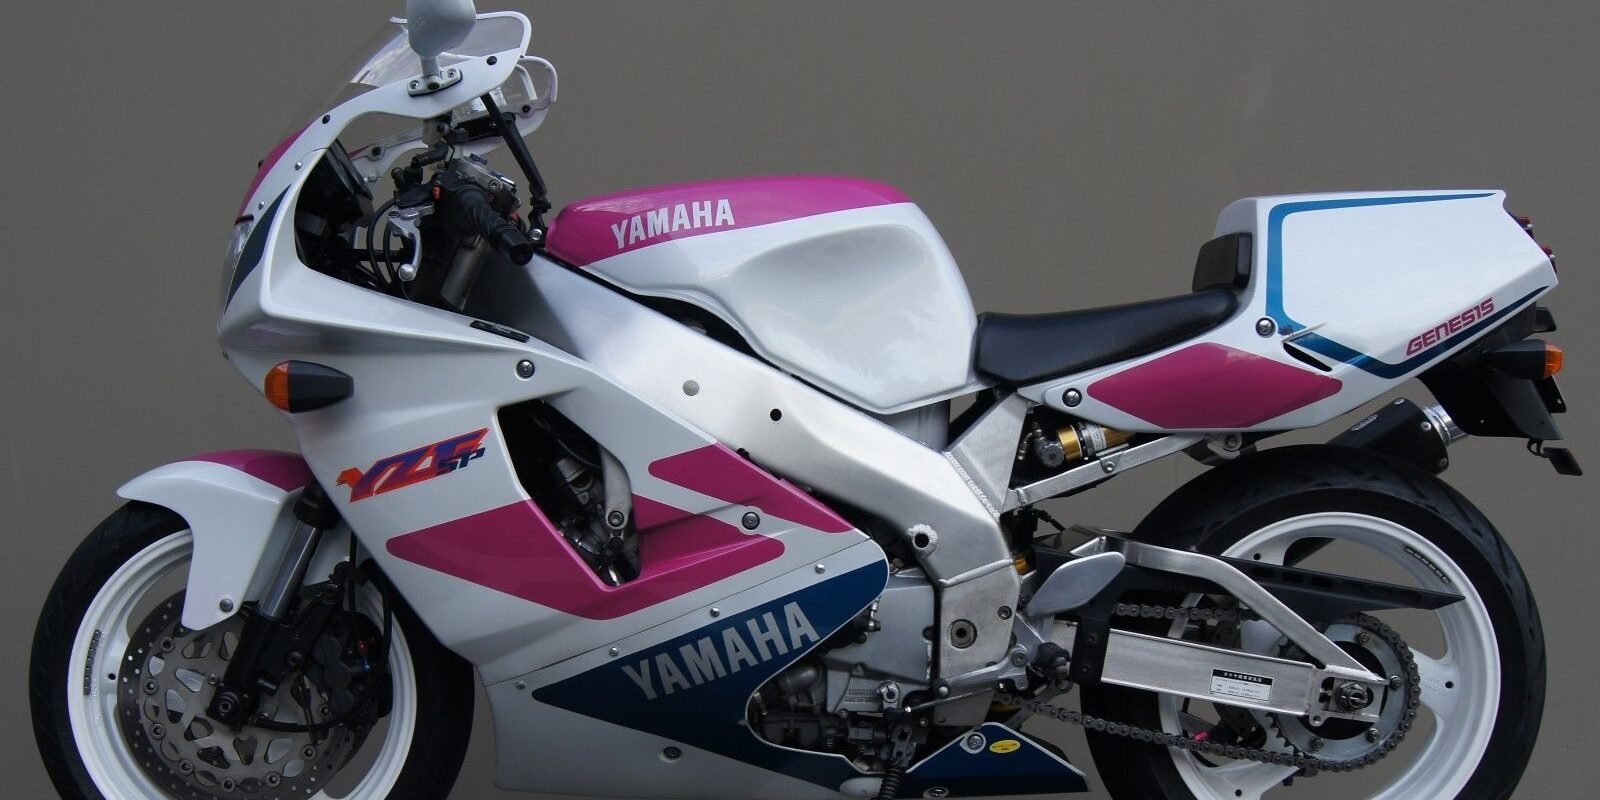 Motorcycle Body & Frames for 1995 Yamaha FZR600R for sale